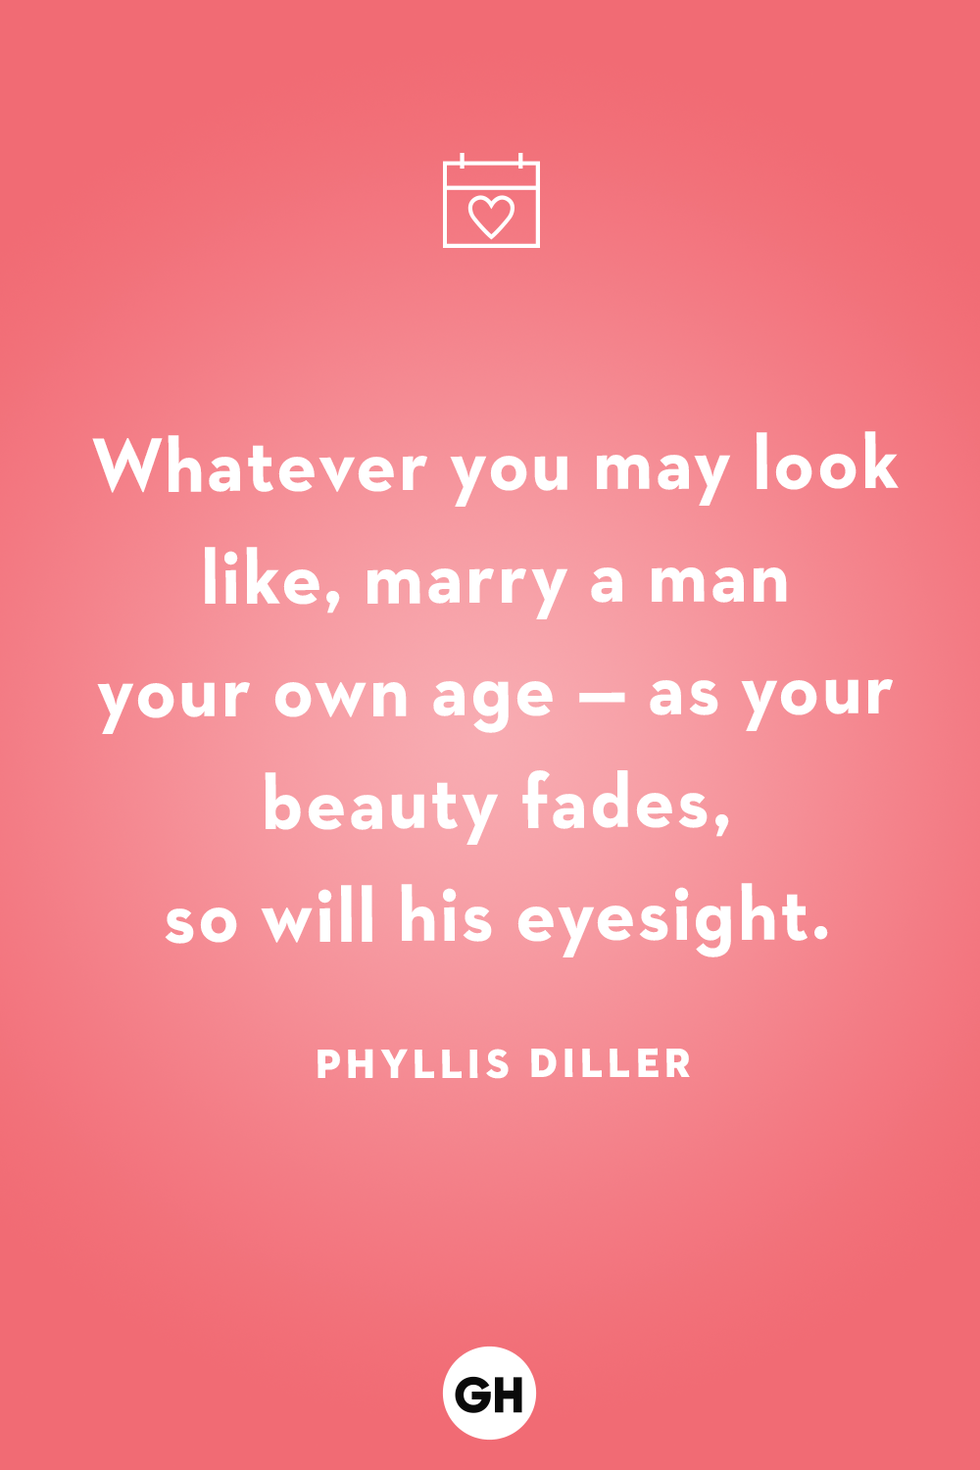 whatever you may look like marry a man your own age as your beauty fades so will his eyesight phyllis diller